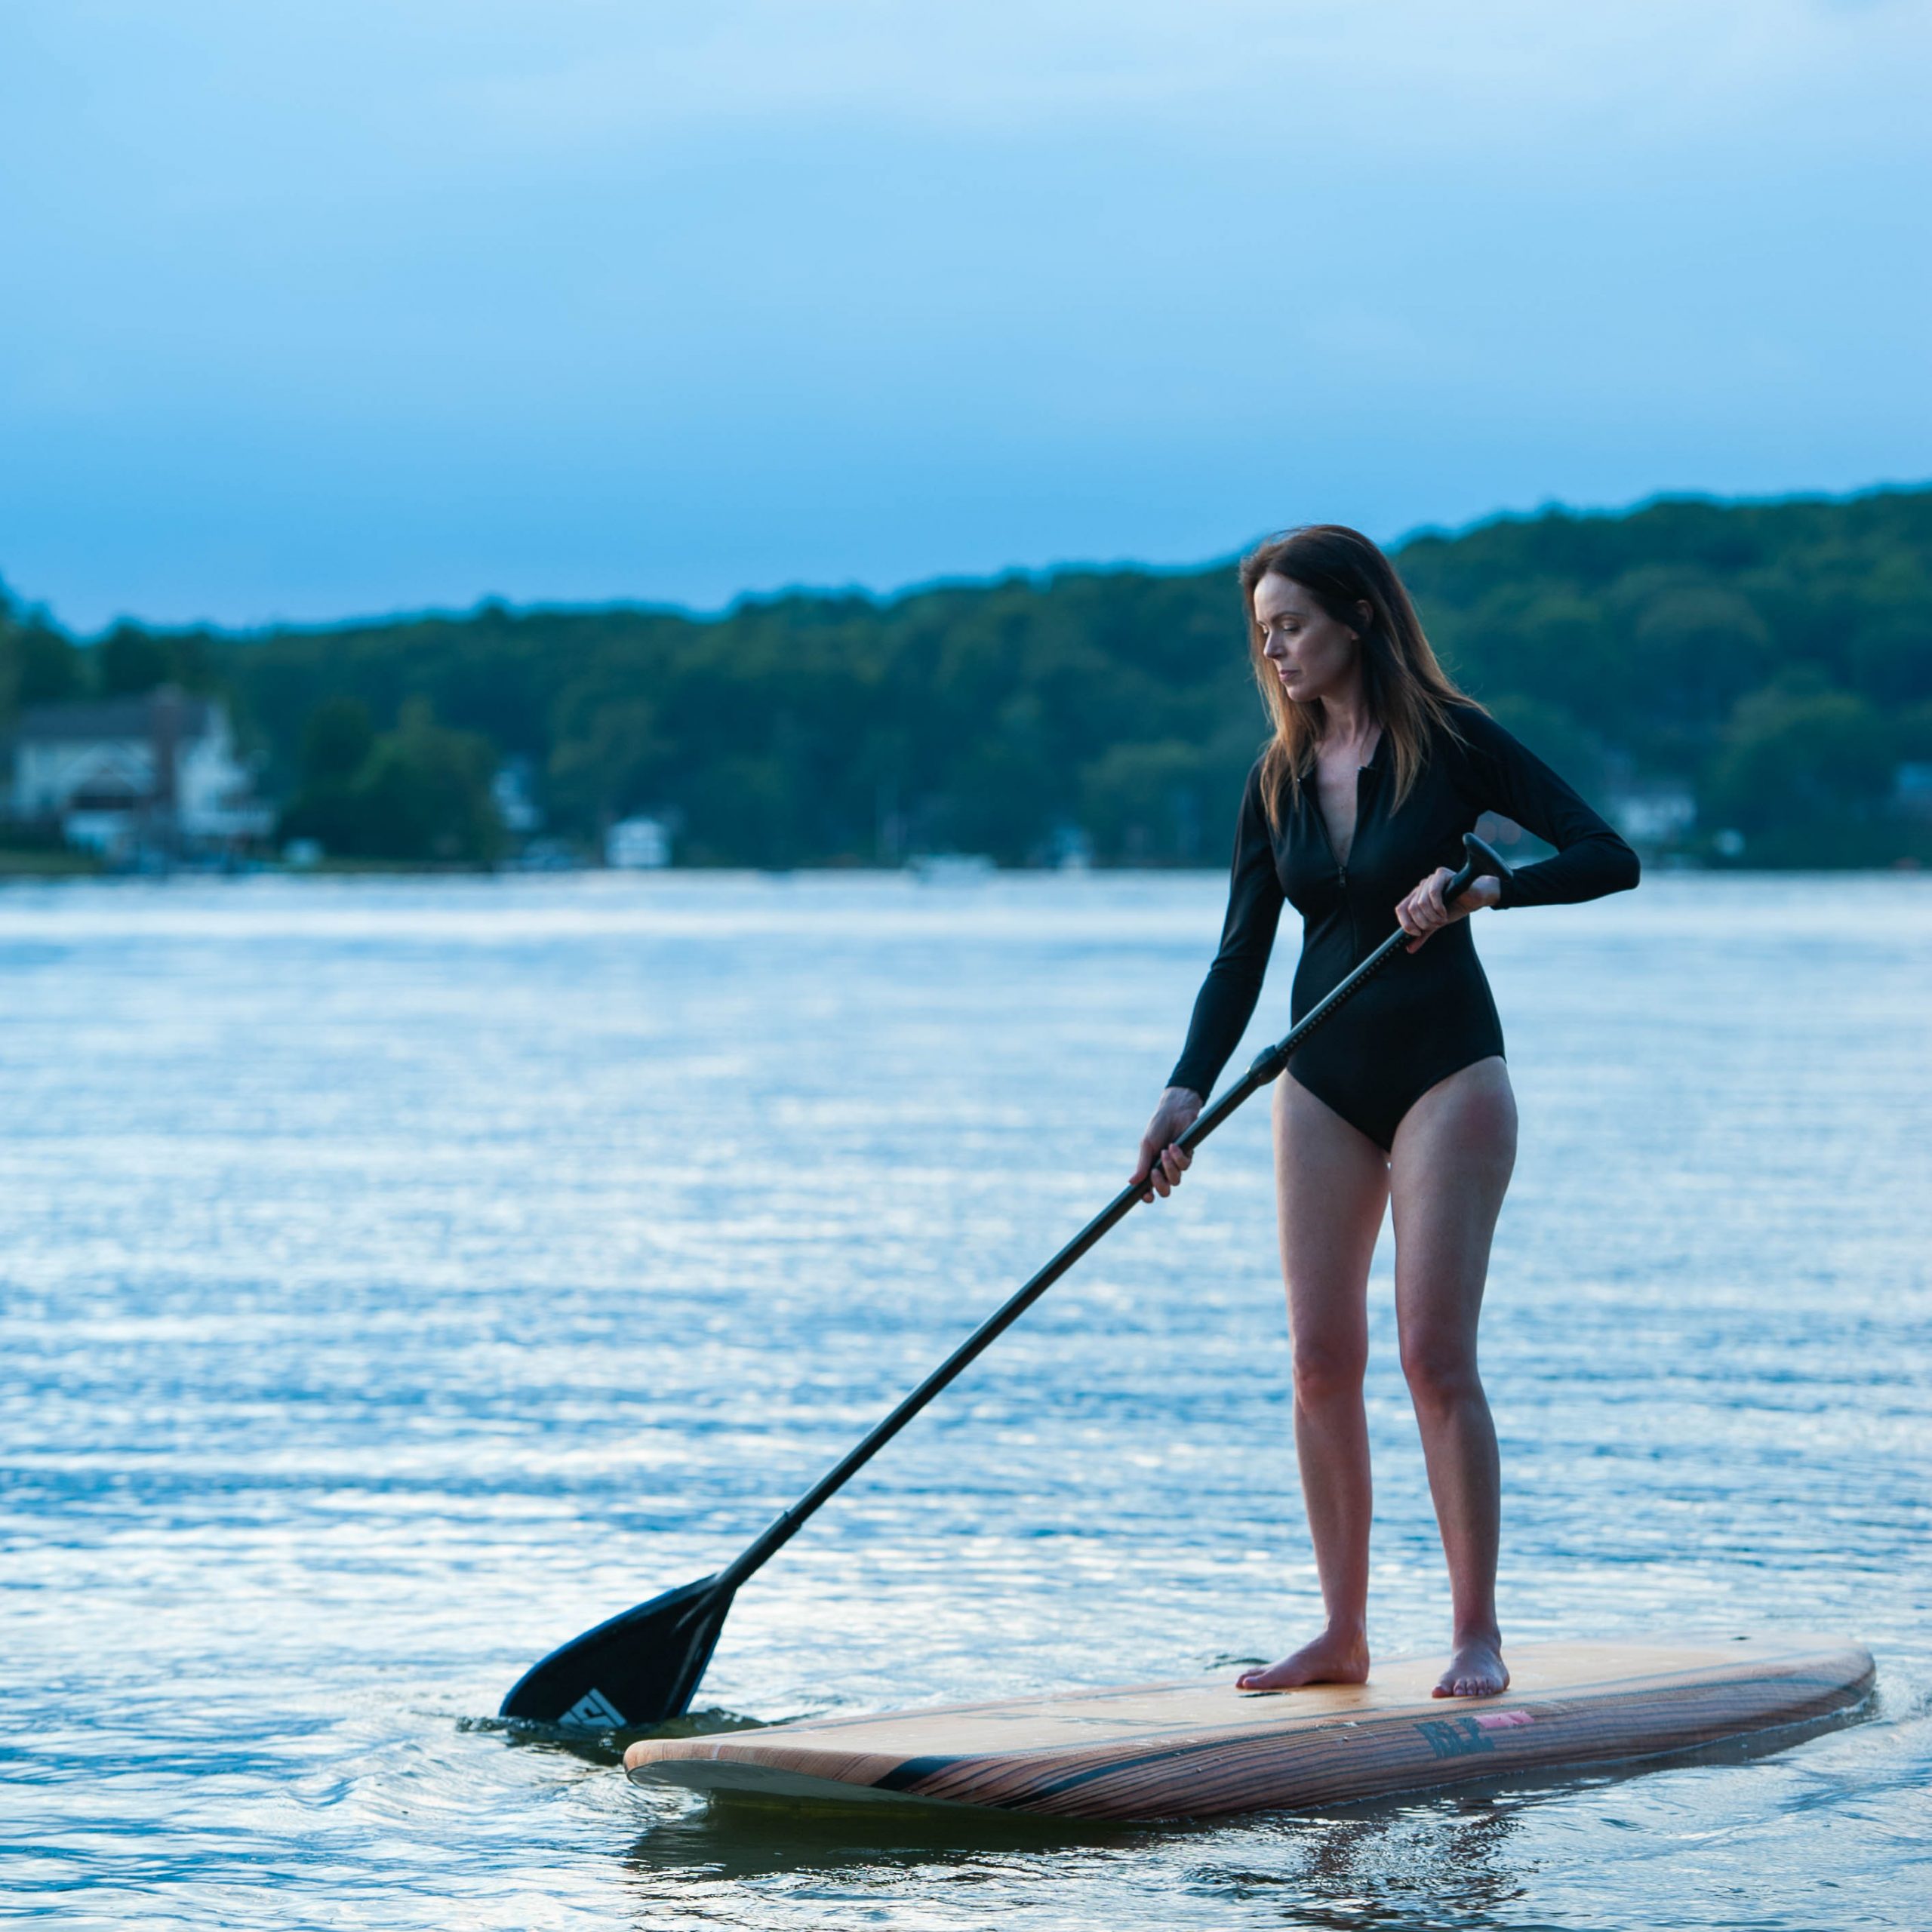 zip-front-long-sleeved-black-swimsuit-made-from-recycled-plastic-bottles-by-sustainable-brand-indigoluna